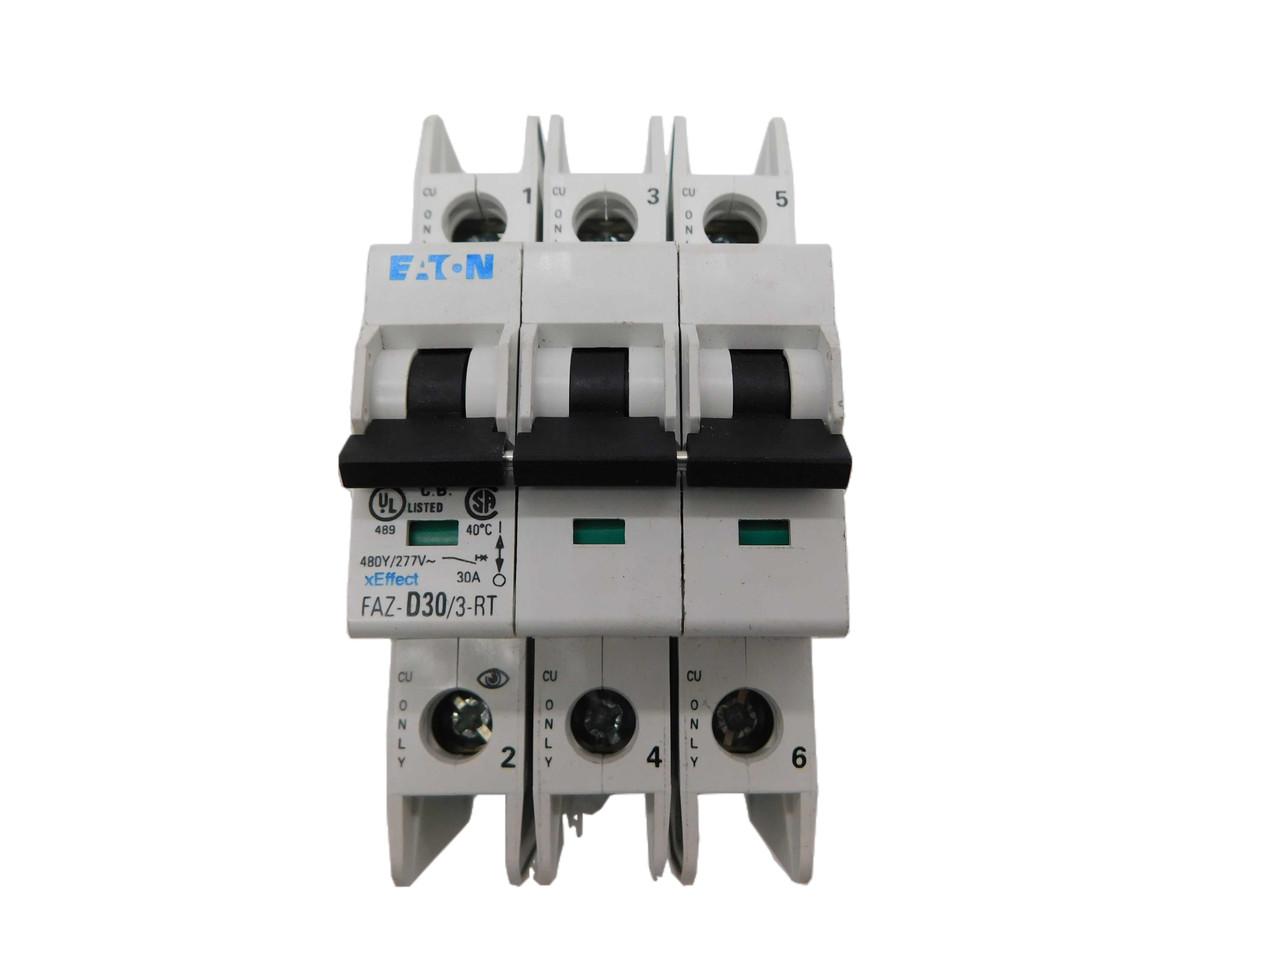 Eaton FAZ-D30/3-RT 277/480 VAC 50/60 Hz, 30 A, 3-Pole, 10/14 kA, 10 to 20 x Rated Current, Ring Tongue Terminal, DIN Rail Mount, Standard Packaging, D-Curve, Current Limiting, Thermal Magnetic